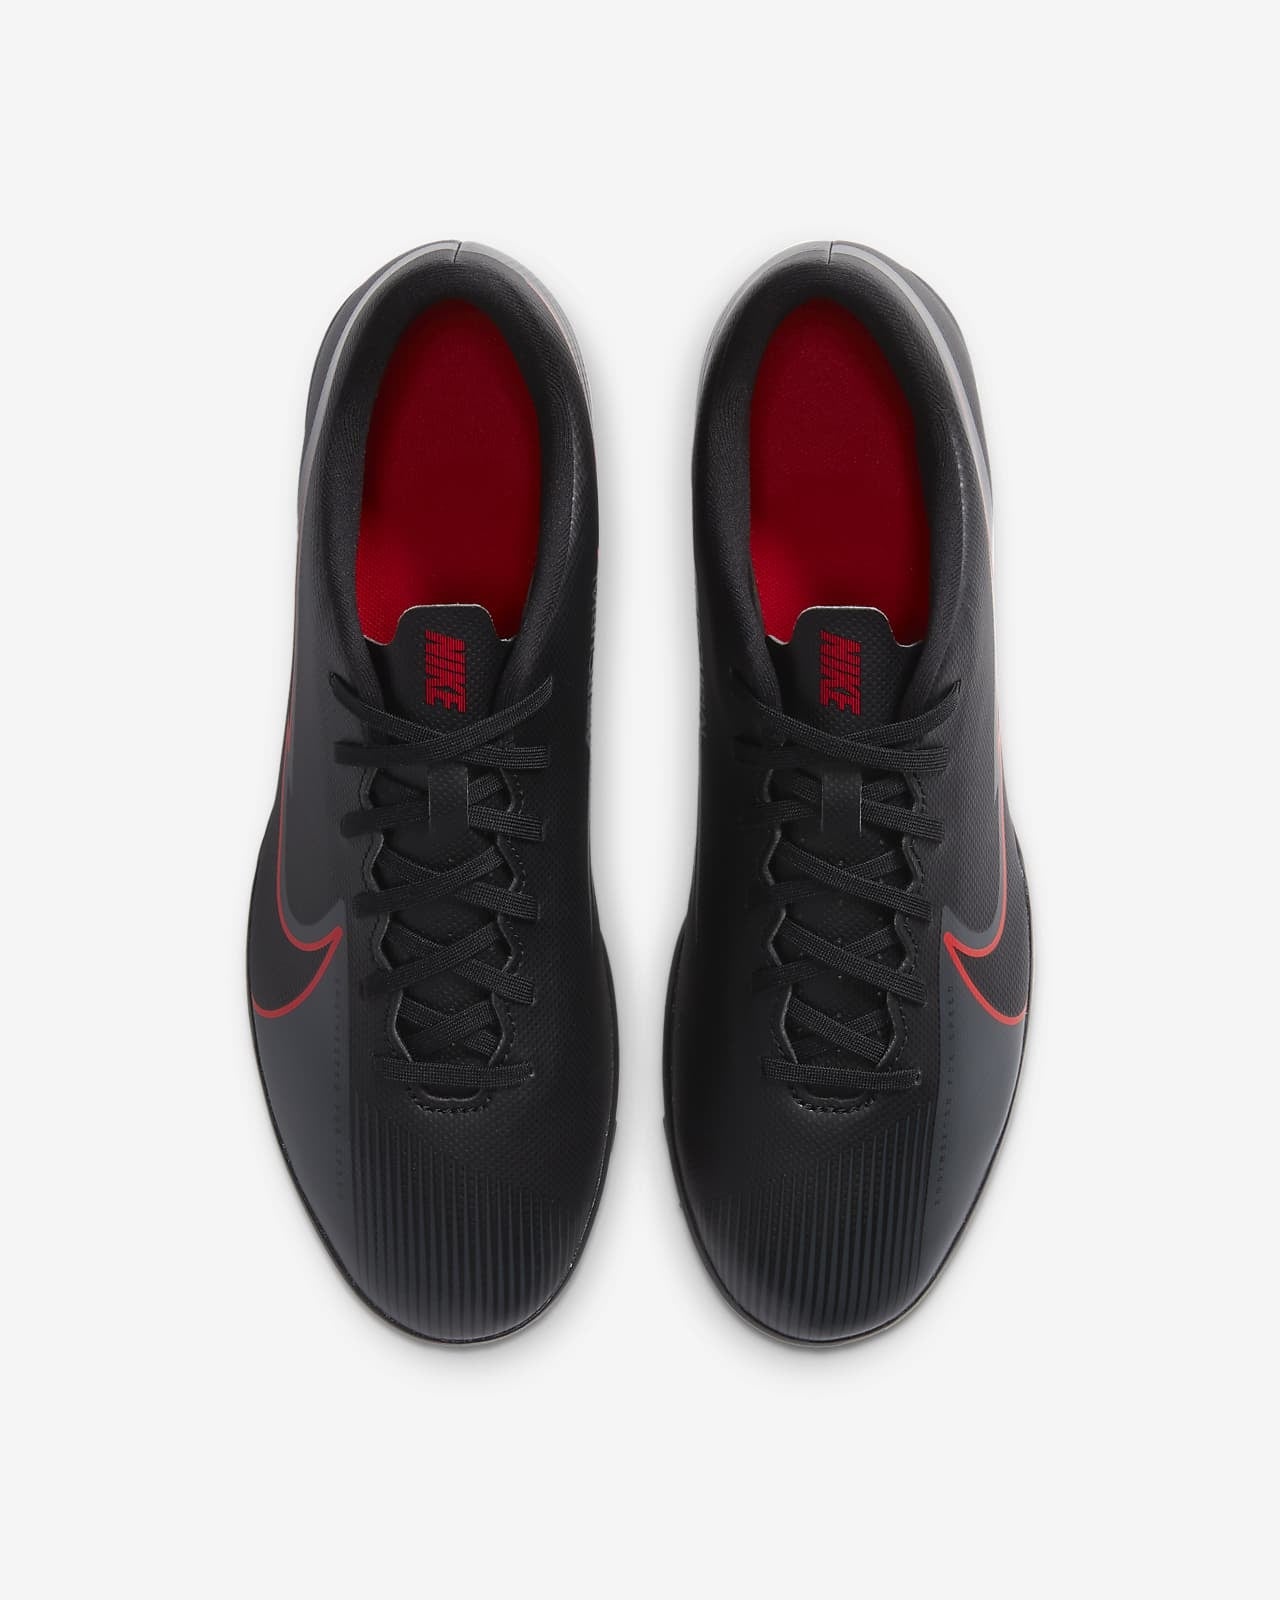 NIKE VAPORT 13 TF CALCETTO